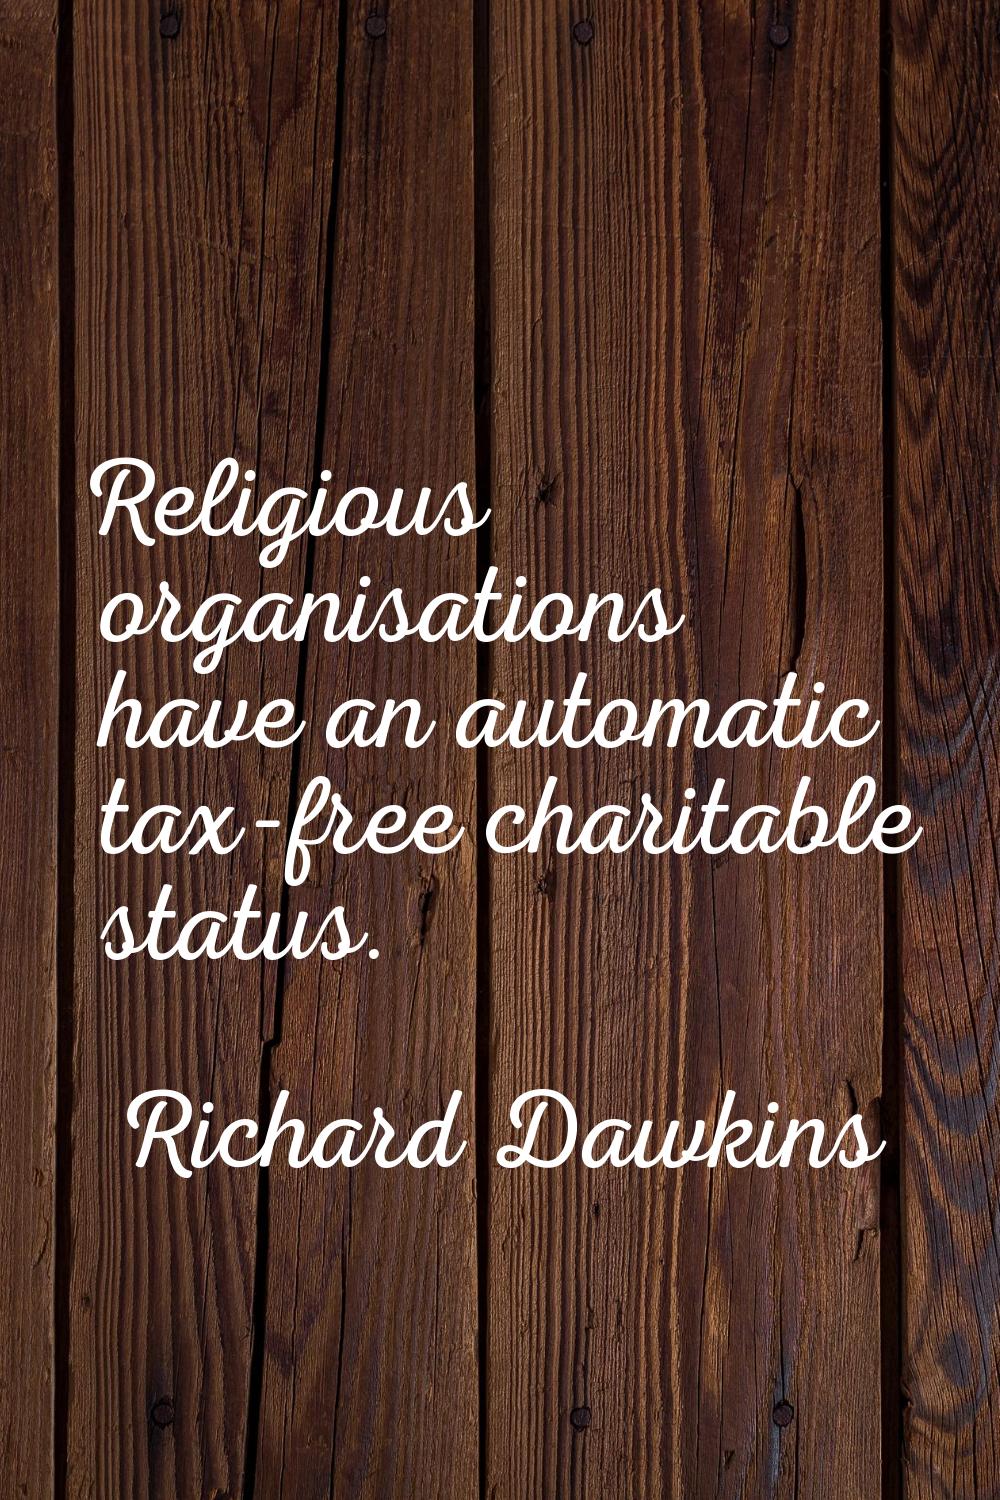 Religious organisations have an automatic tax-free charitable status.